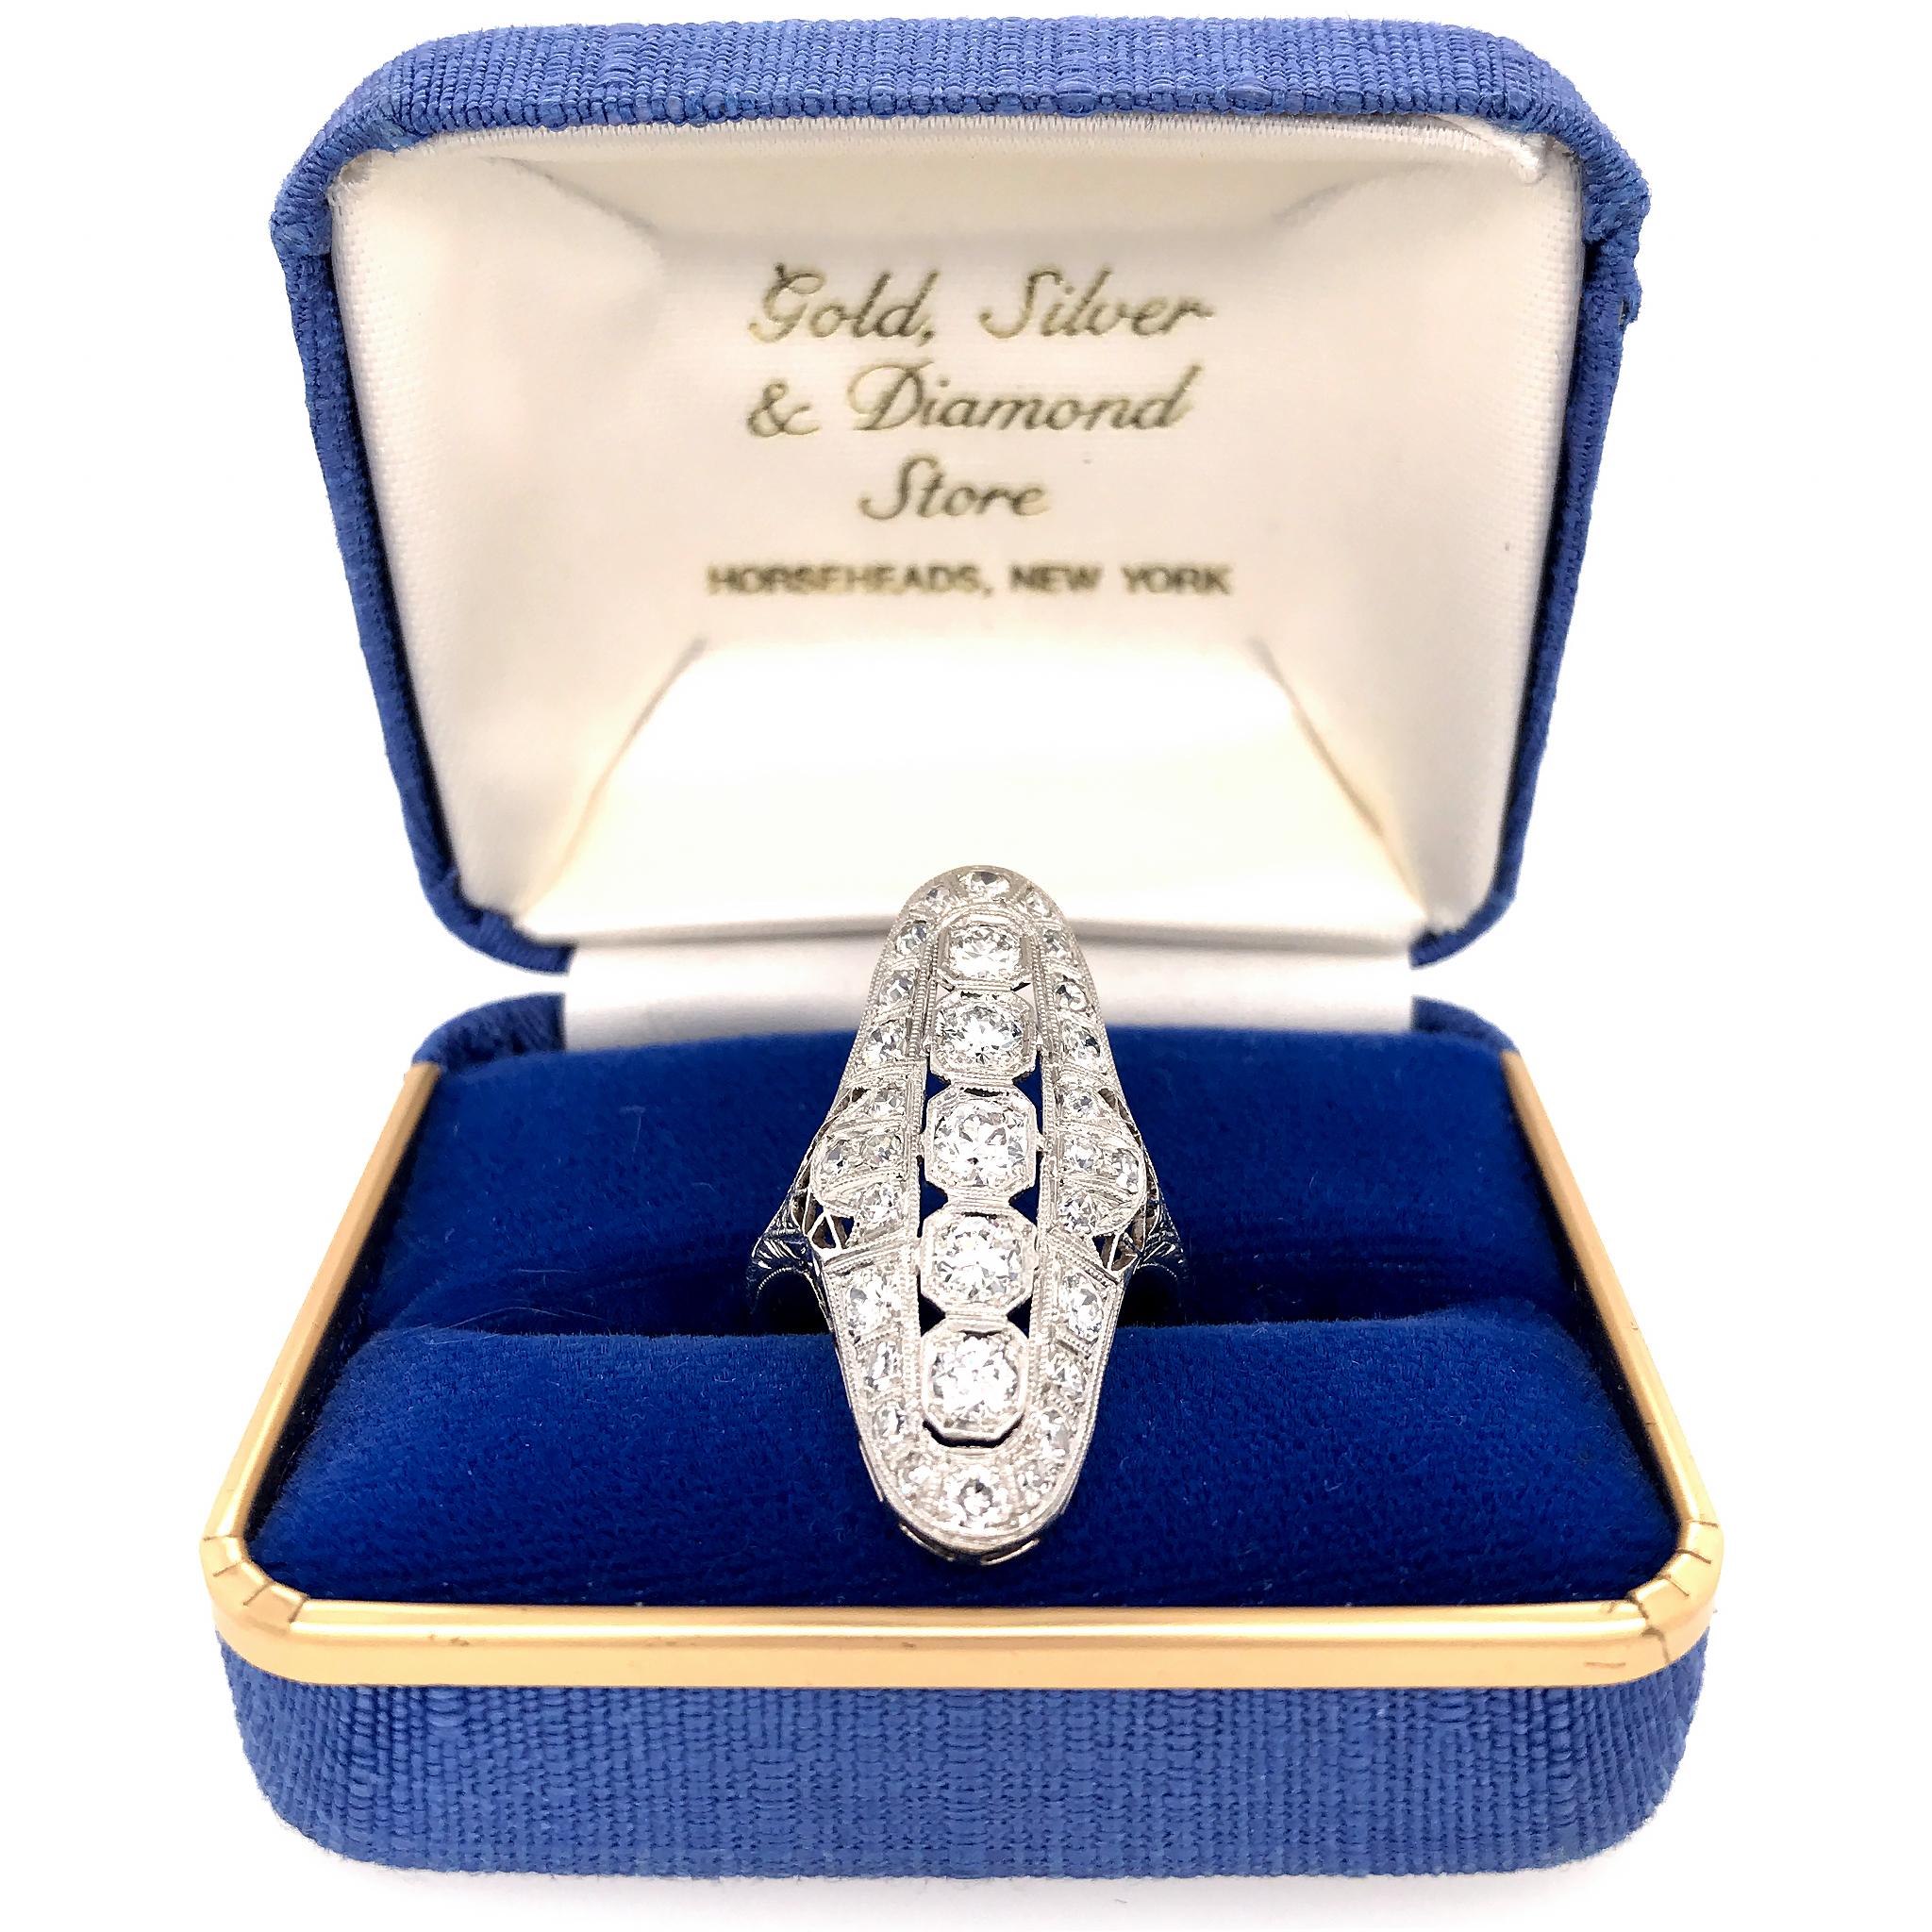 Platinum
Diamond: 2.0 ct twd (estimated)
Ring Size: 7
Measurement: 28mm
Total Weight: 5.89 grams